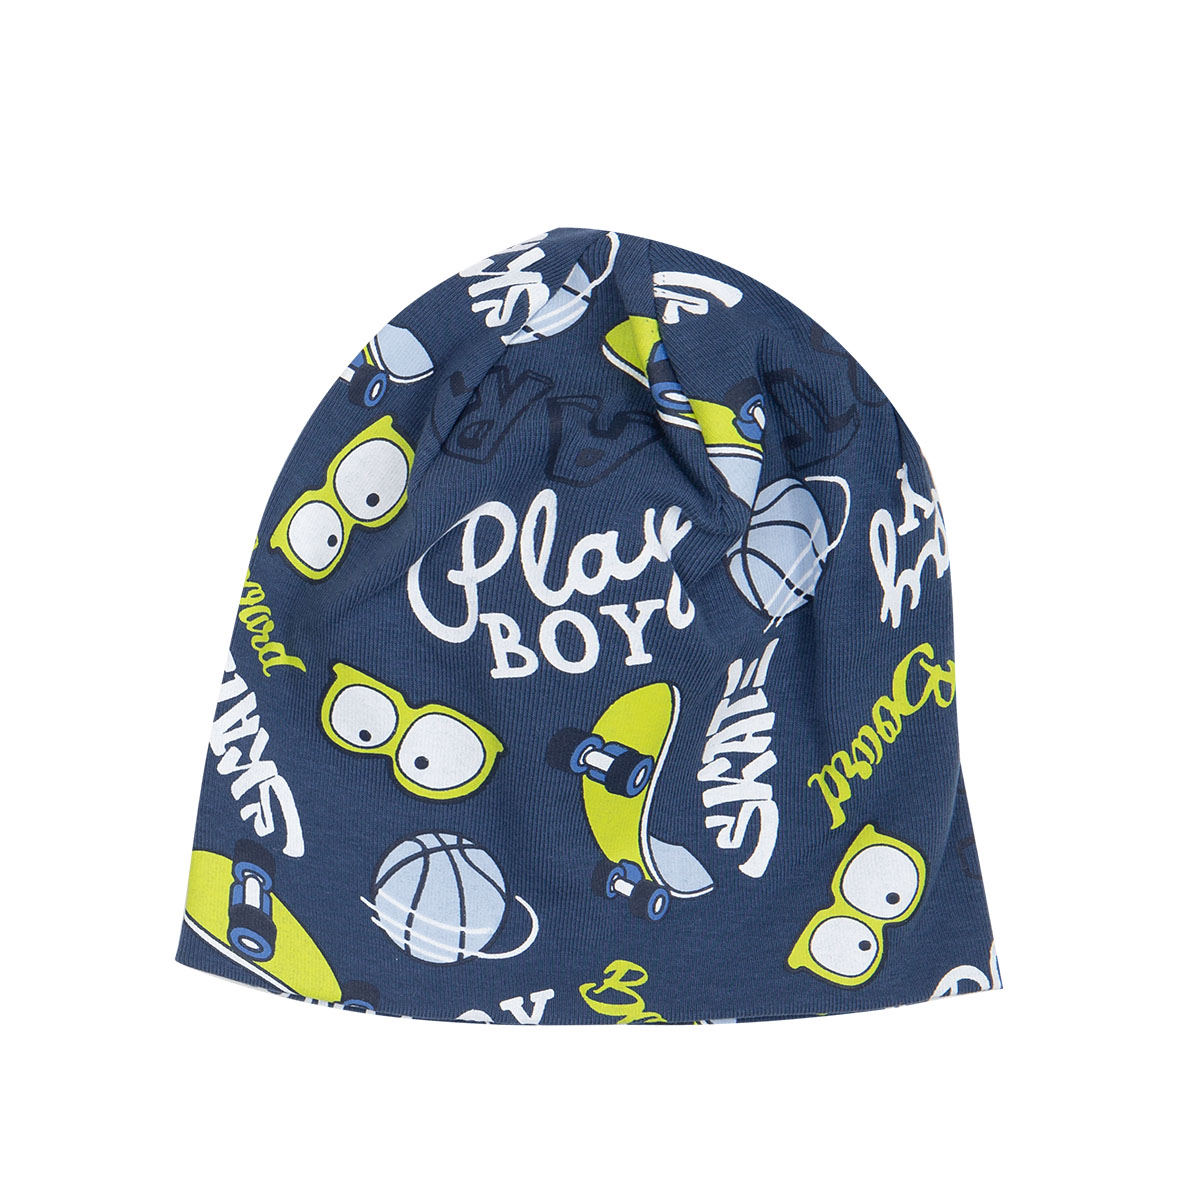 Mawi cappello stampa skate - Mawi